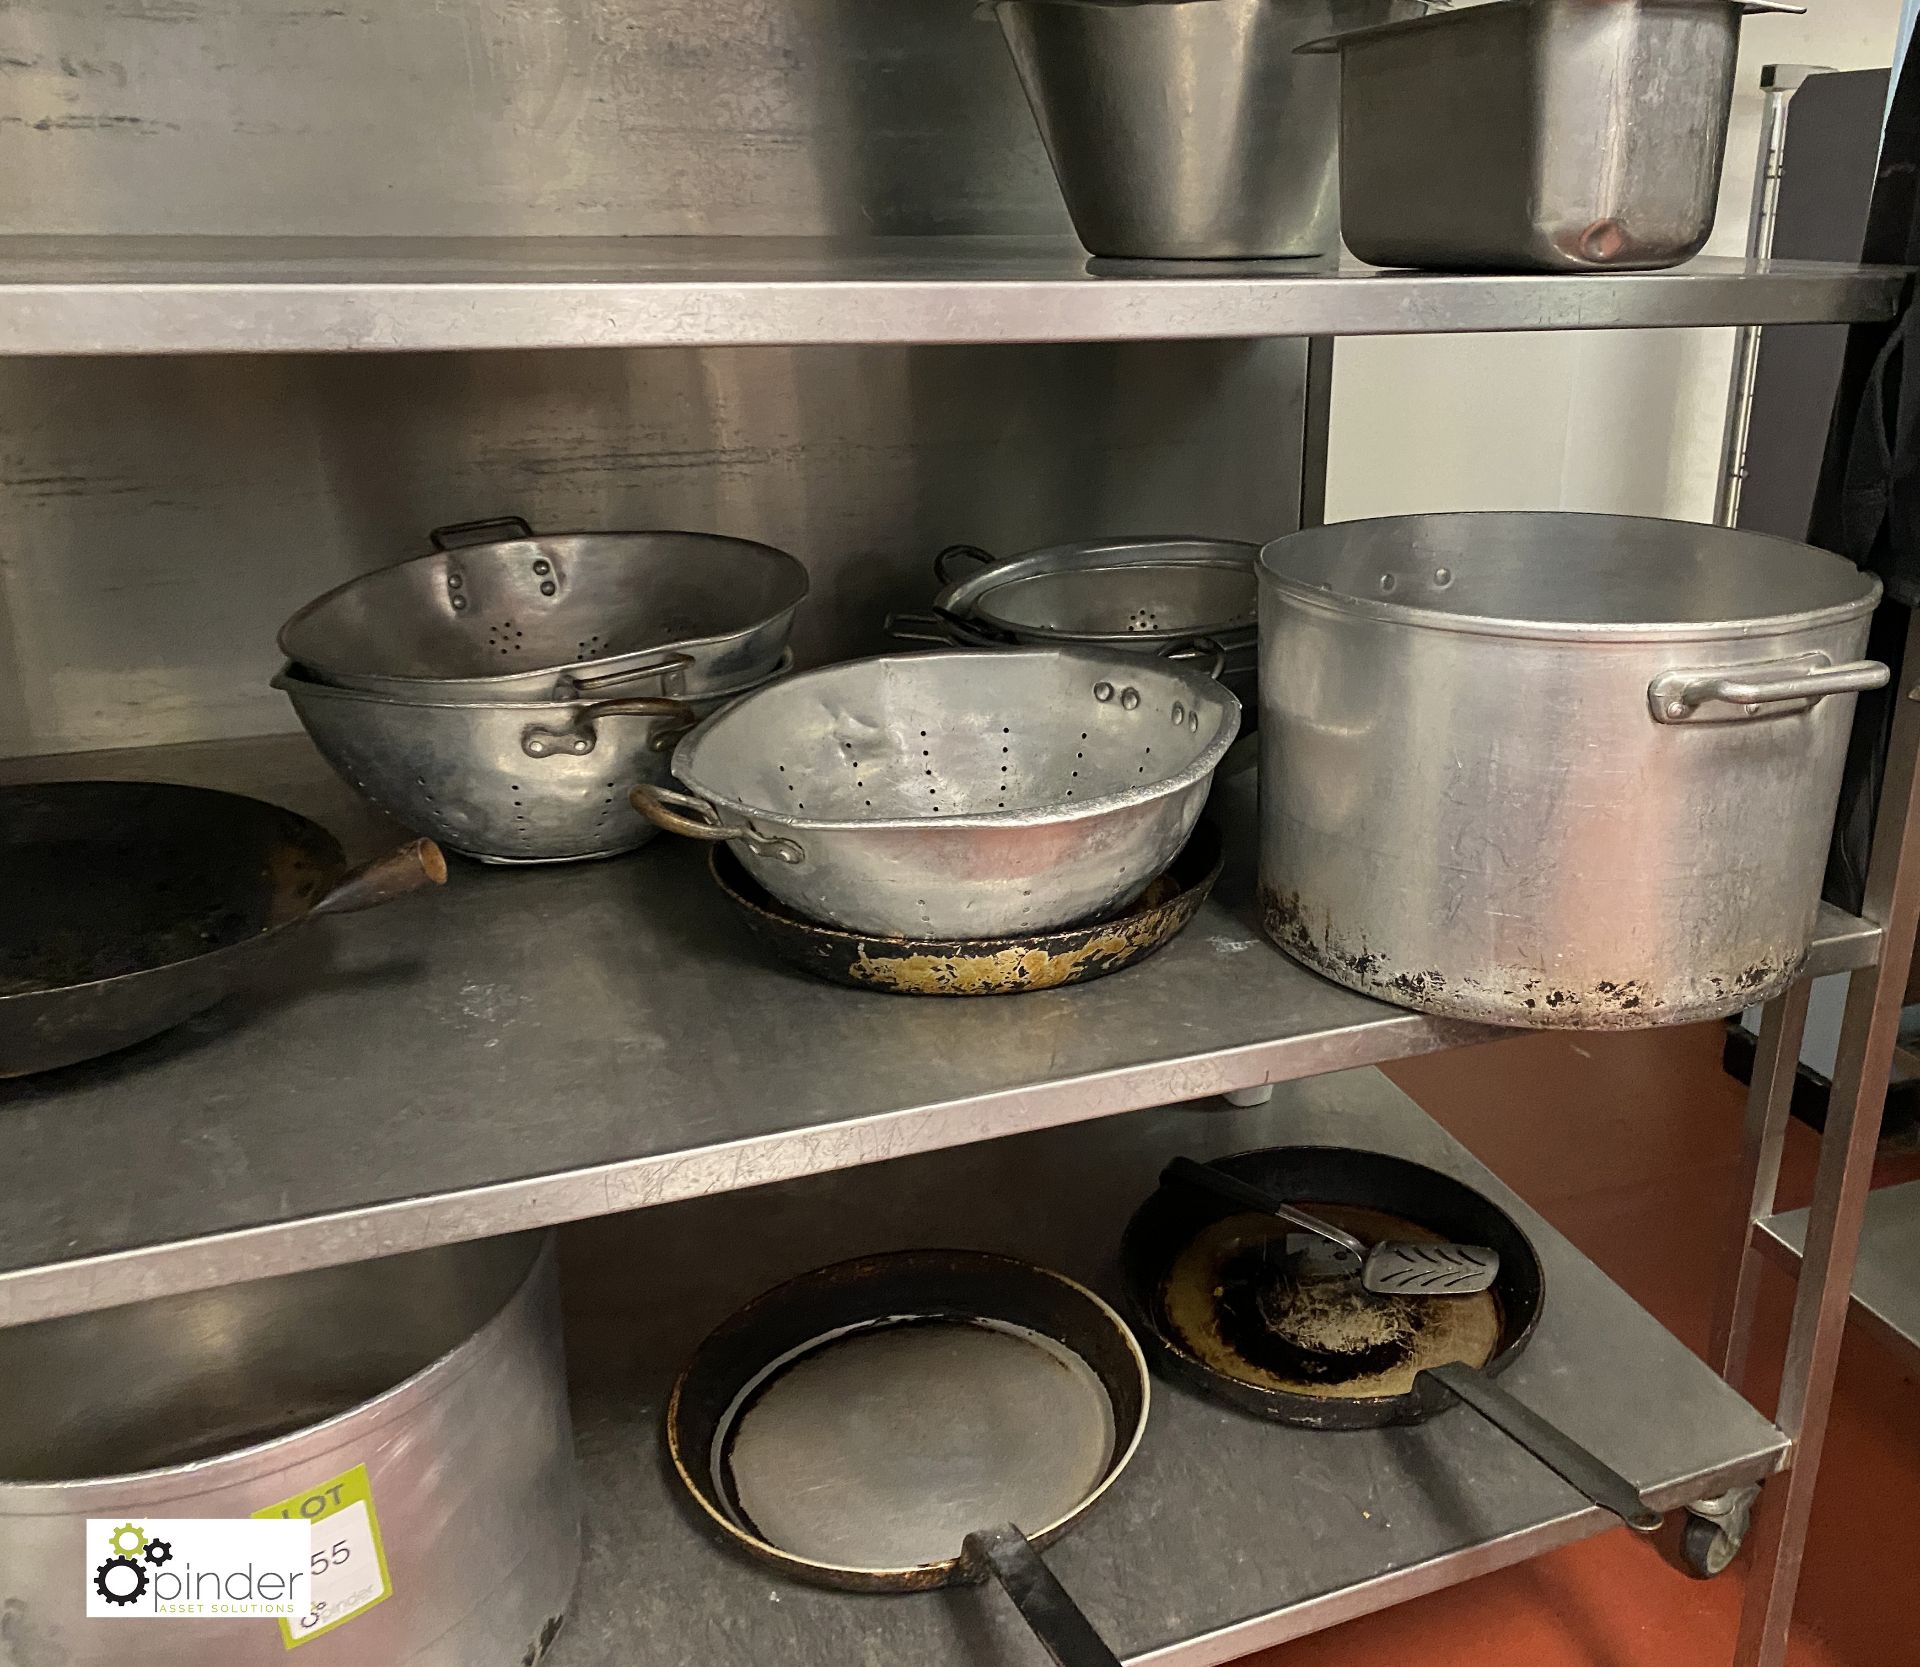 Quantity Cooking Pots, Frying Pans, to rack (rack not including – lot 54) (lot location – Parkview